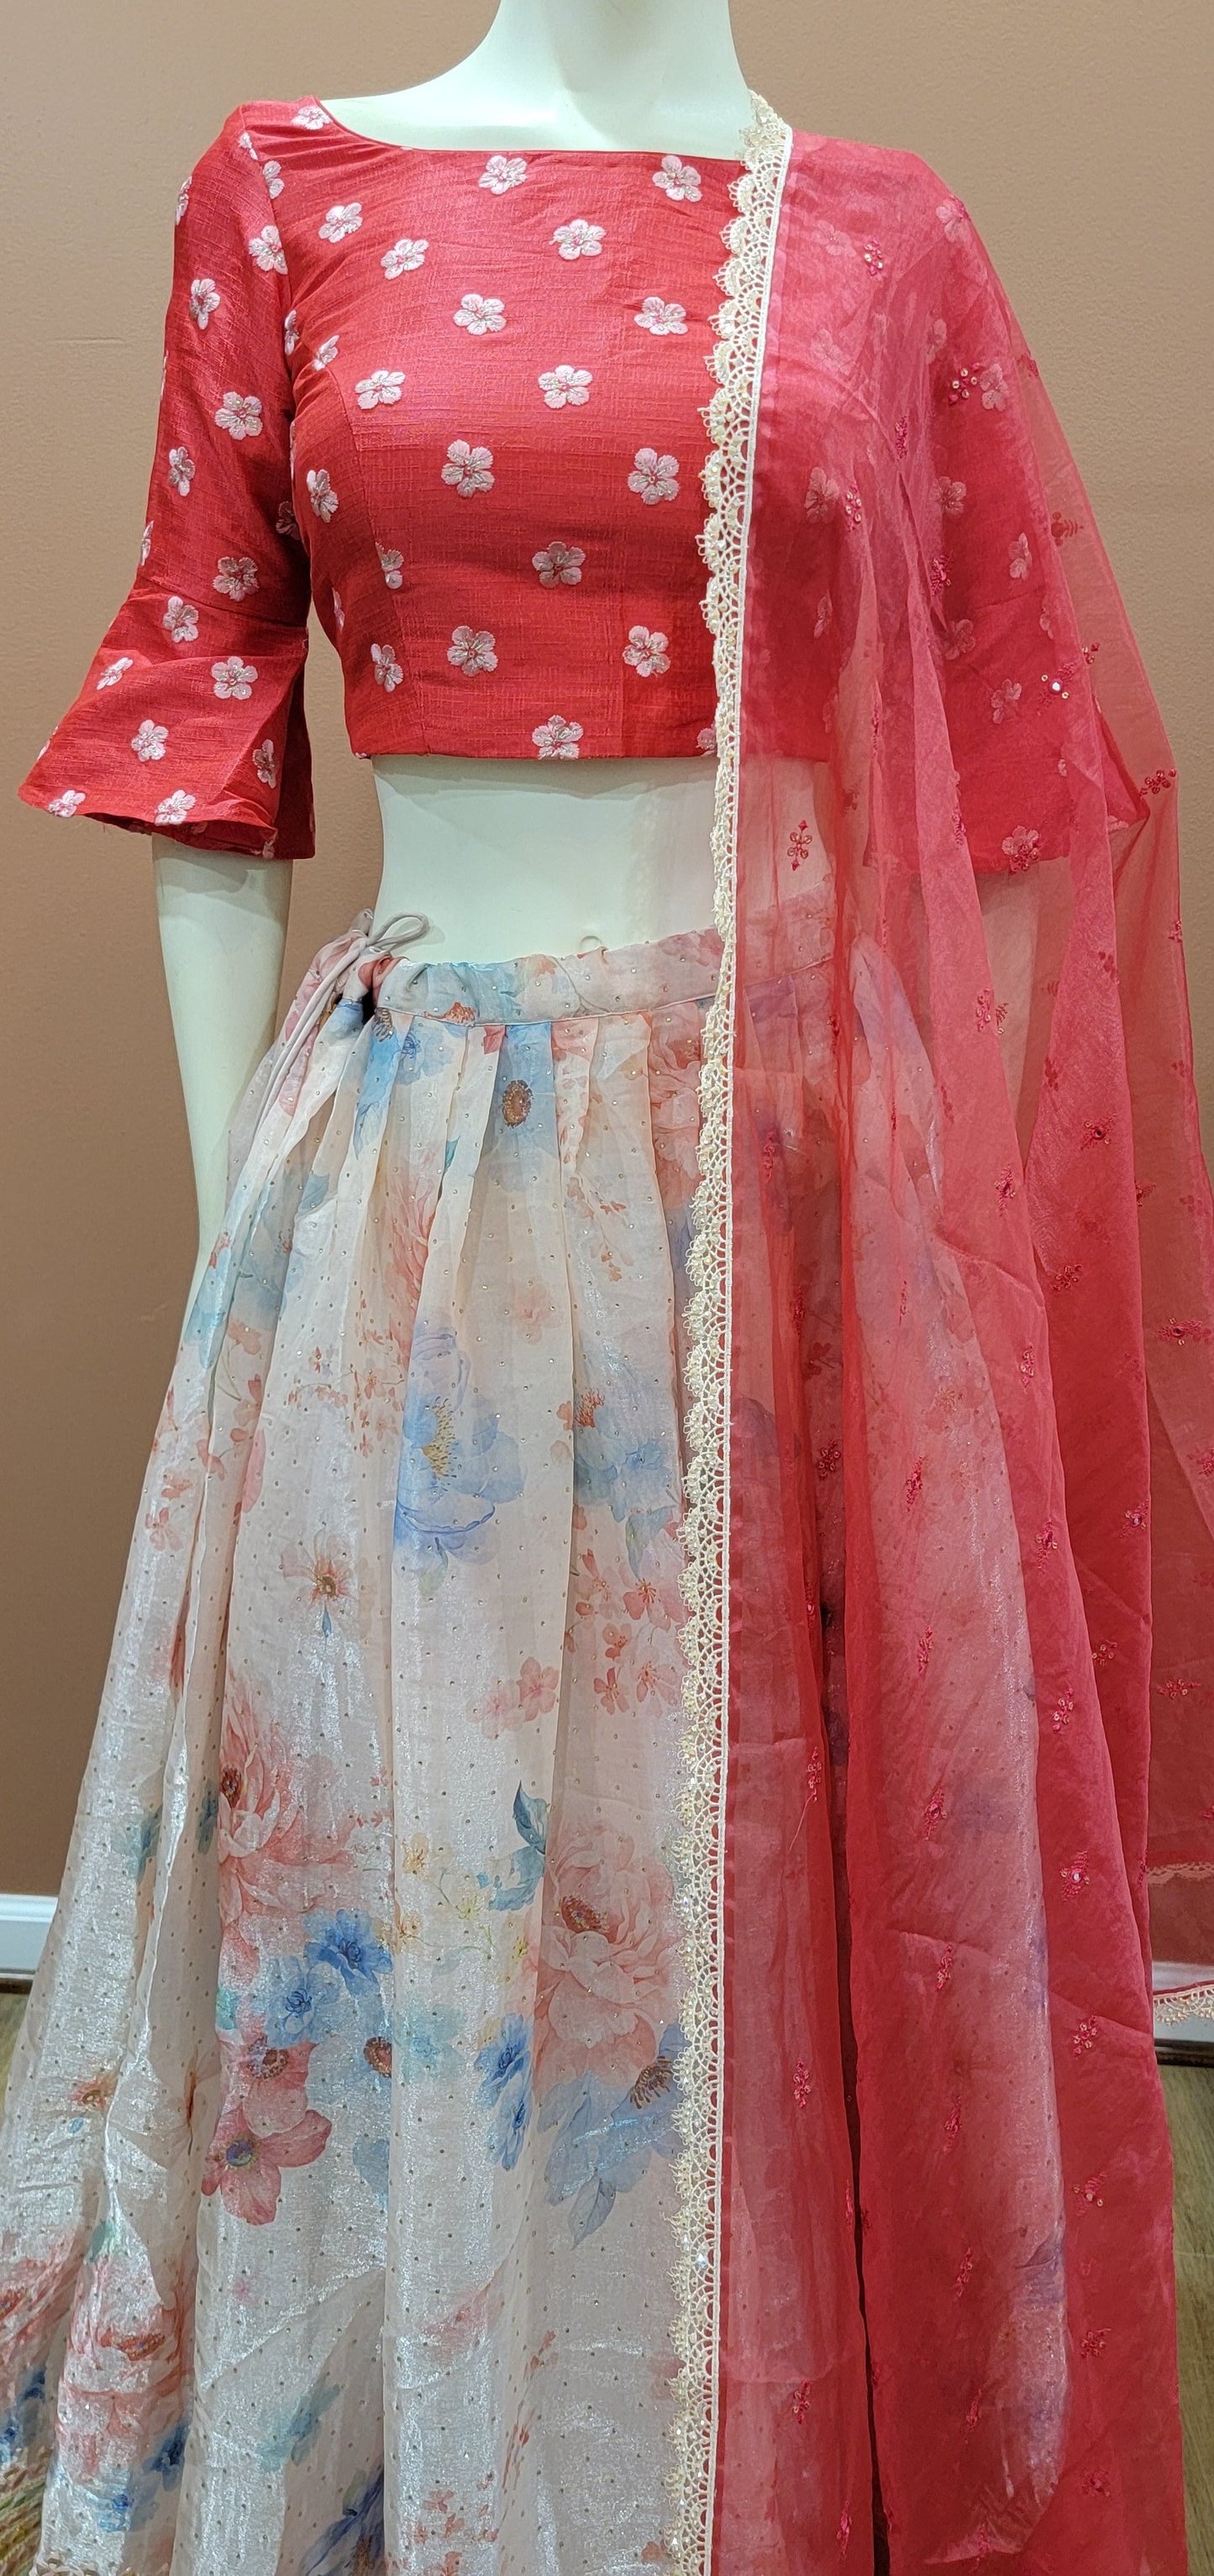 Organza Lehenga Set in Red and Pink